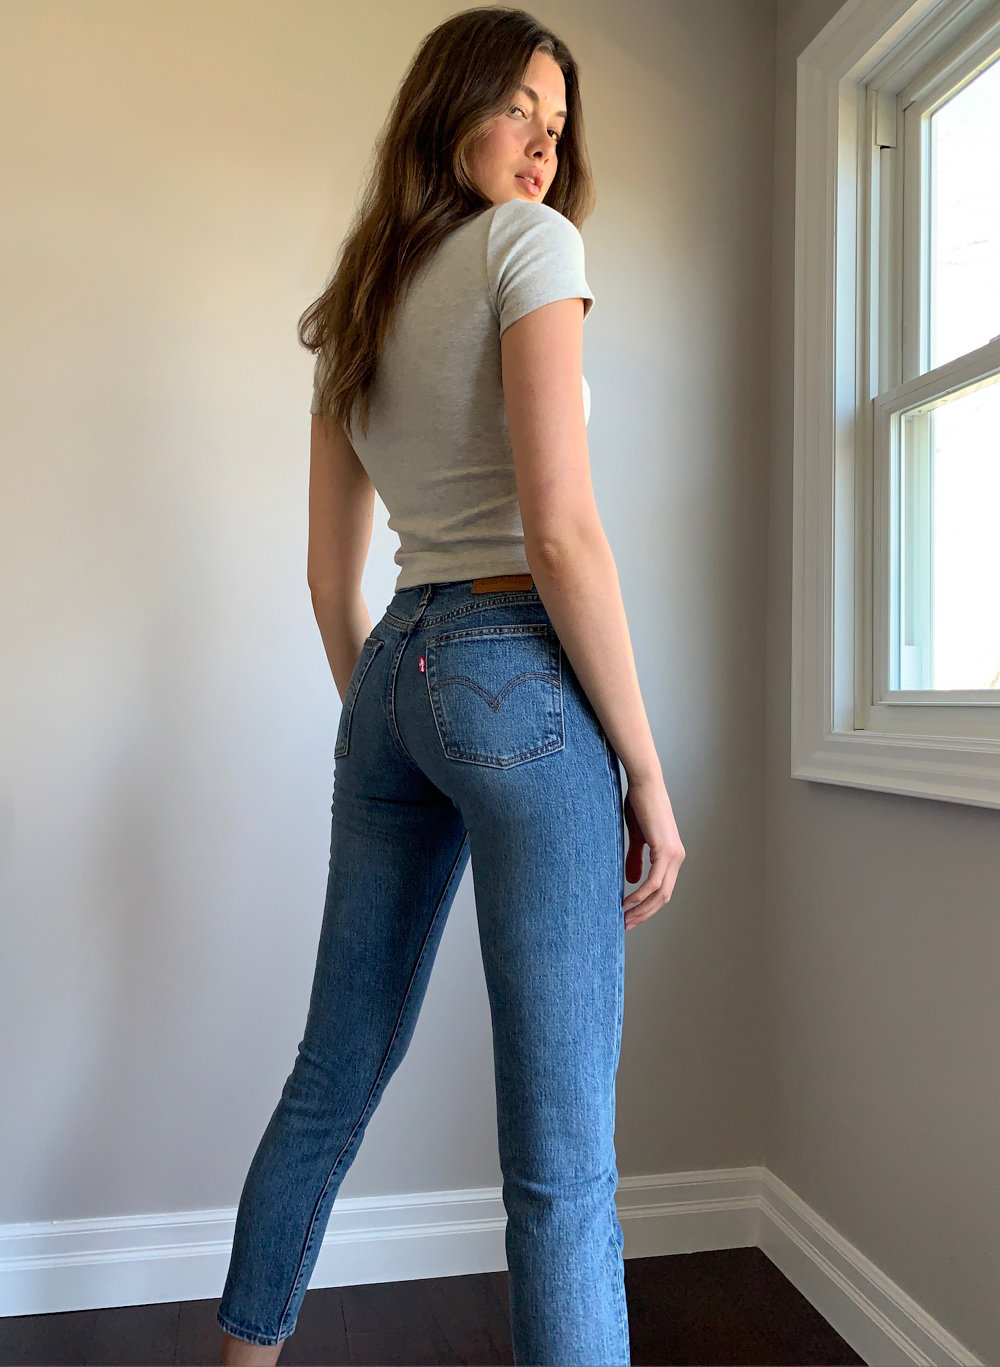 levis wedgie jeans sizing